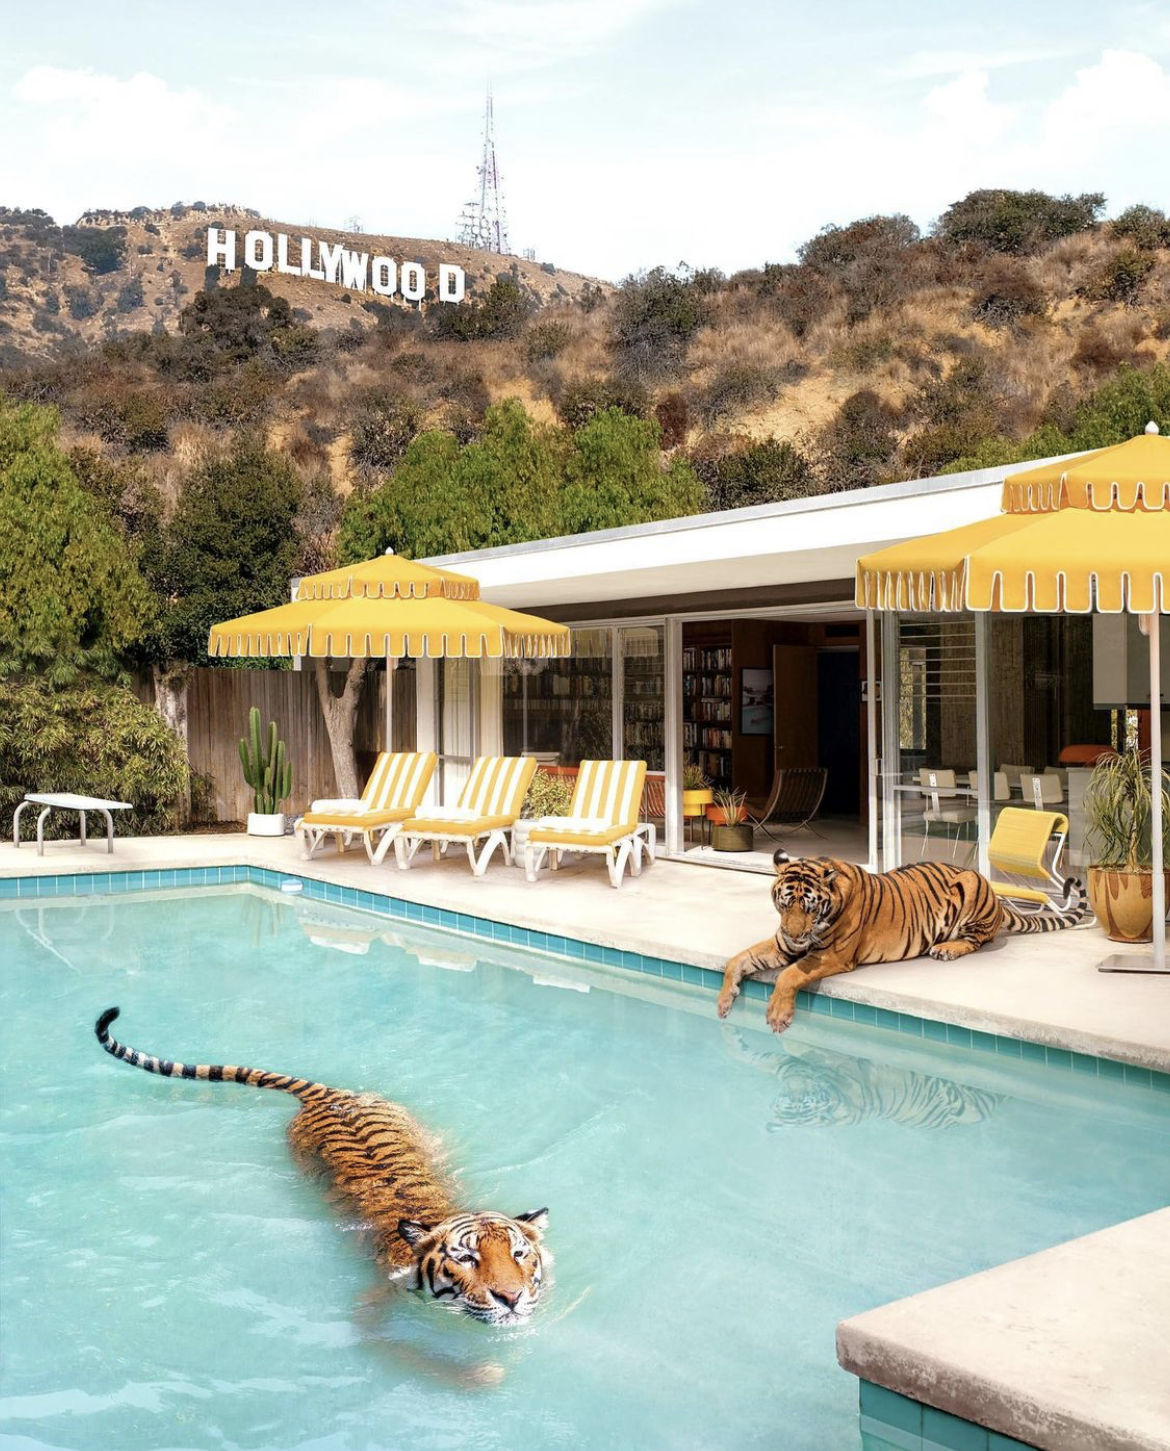 Image of tigers and umbrellas at the pool